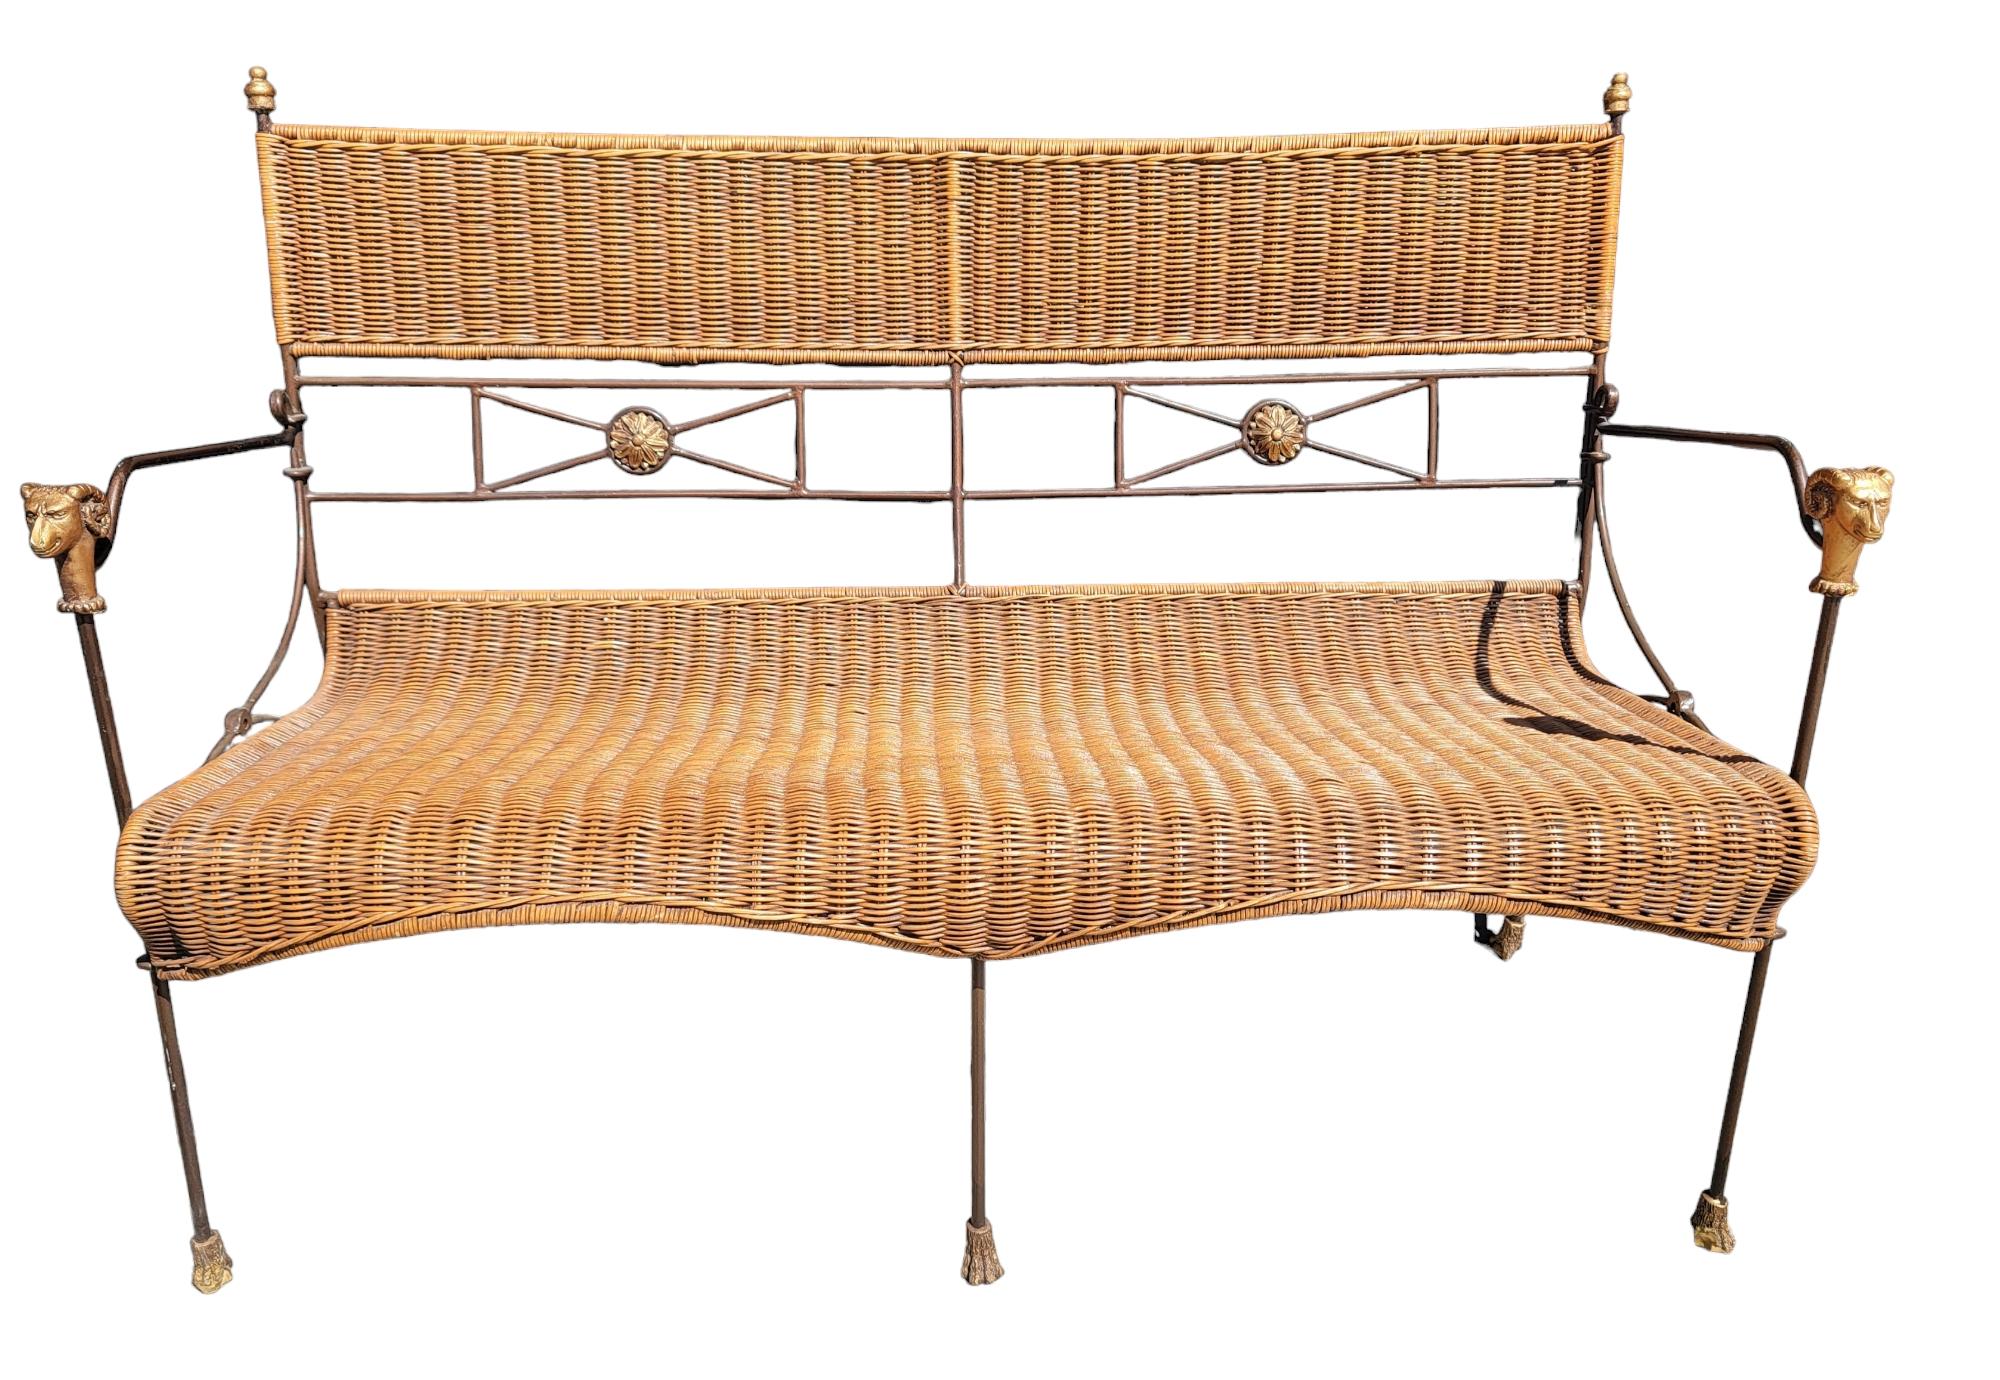 Set of Three Iron And Wicker Settee And Chair By Giacometti  In Good Condition For Sale In Pasadena, CA